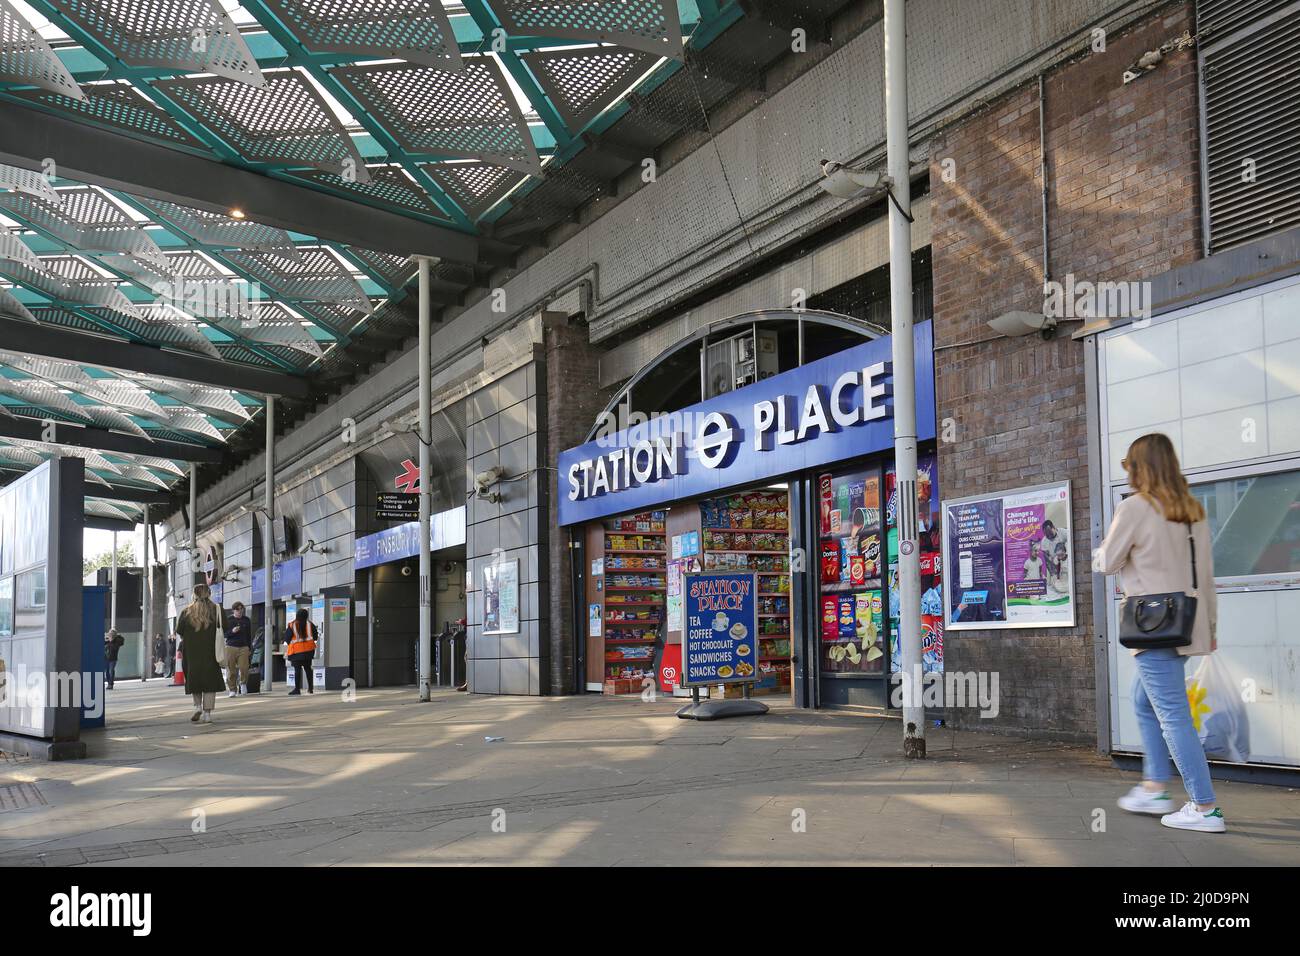 Entrance to Finsbury Park ststion in London, UK. Shows undercover area between bus stops and staion. London Underground and main line train services Stock Photo